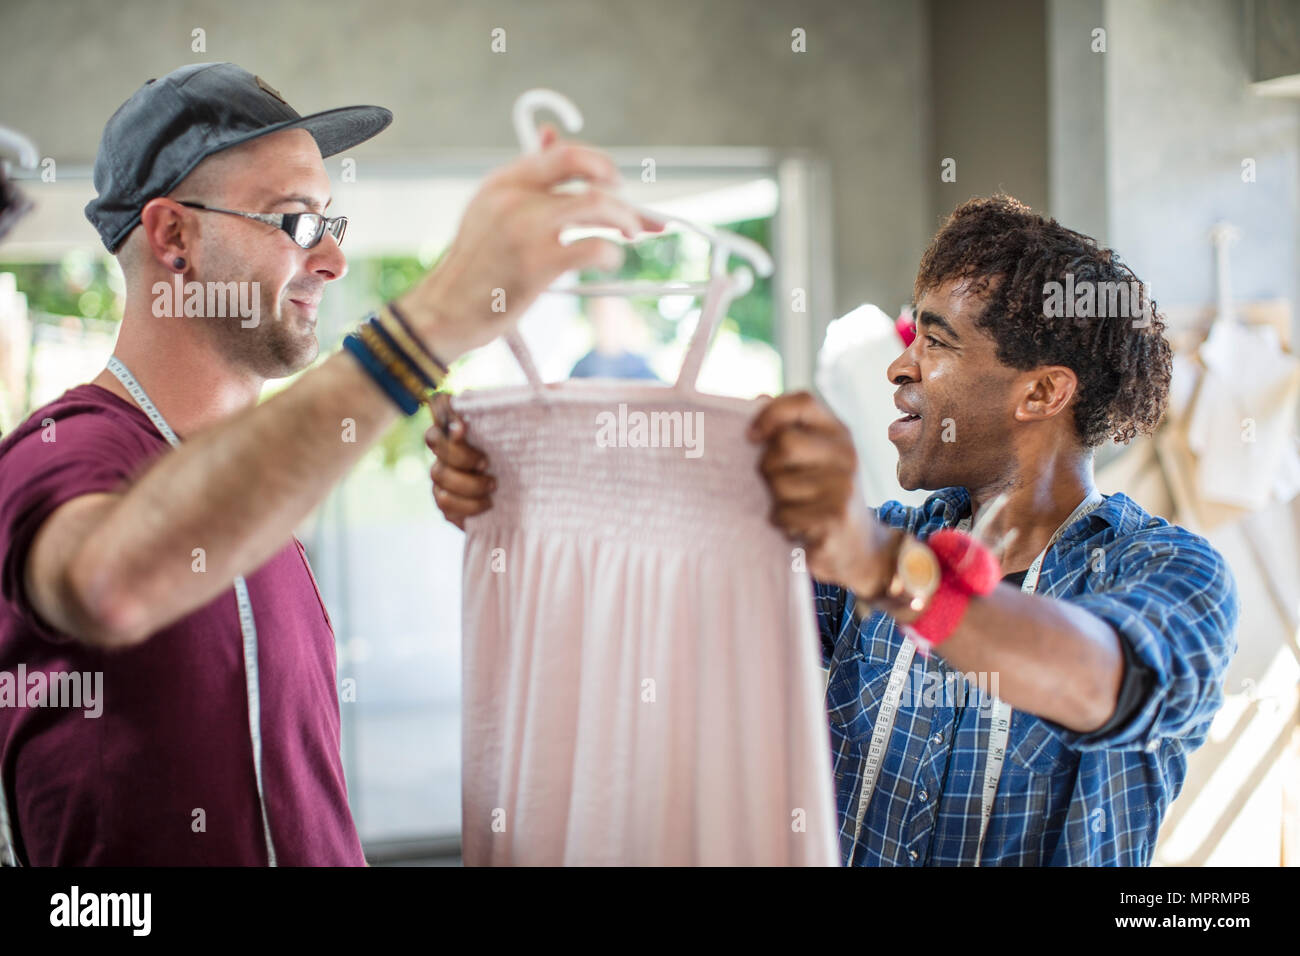 Smiling fashion designer showing dress to colleague Stock Photo